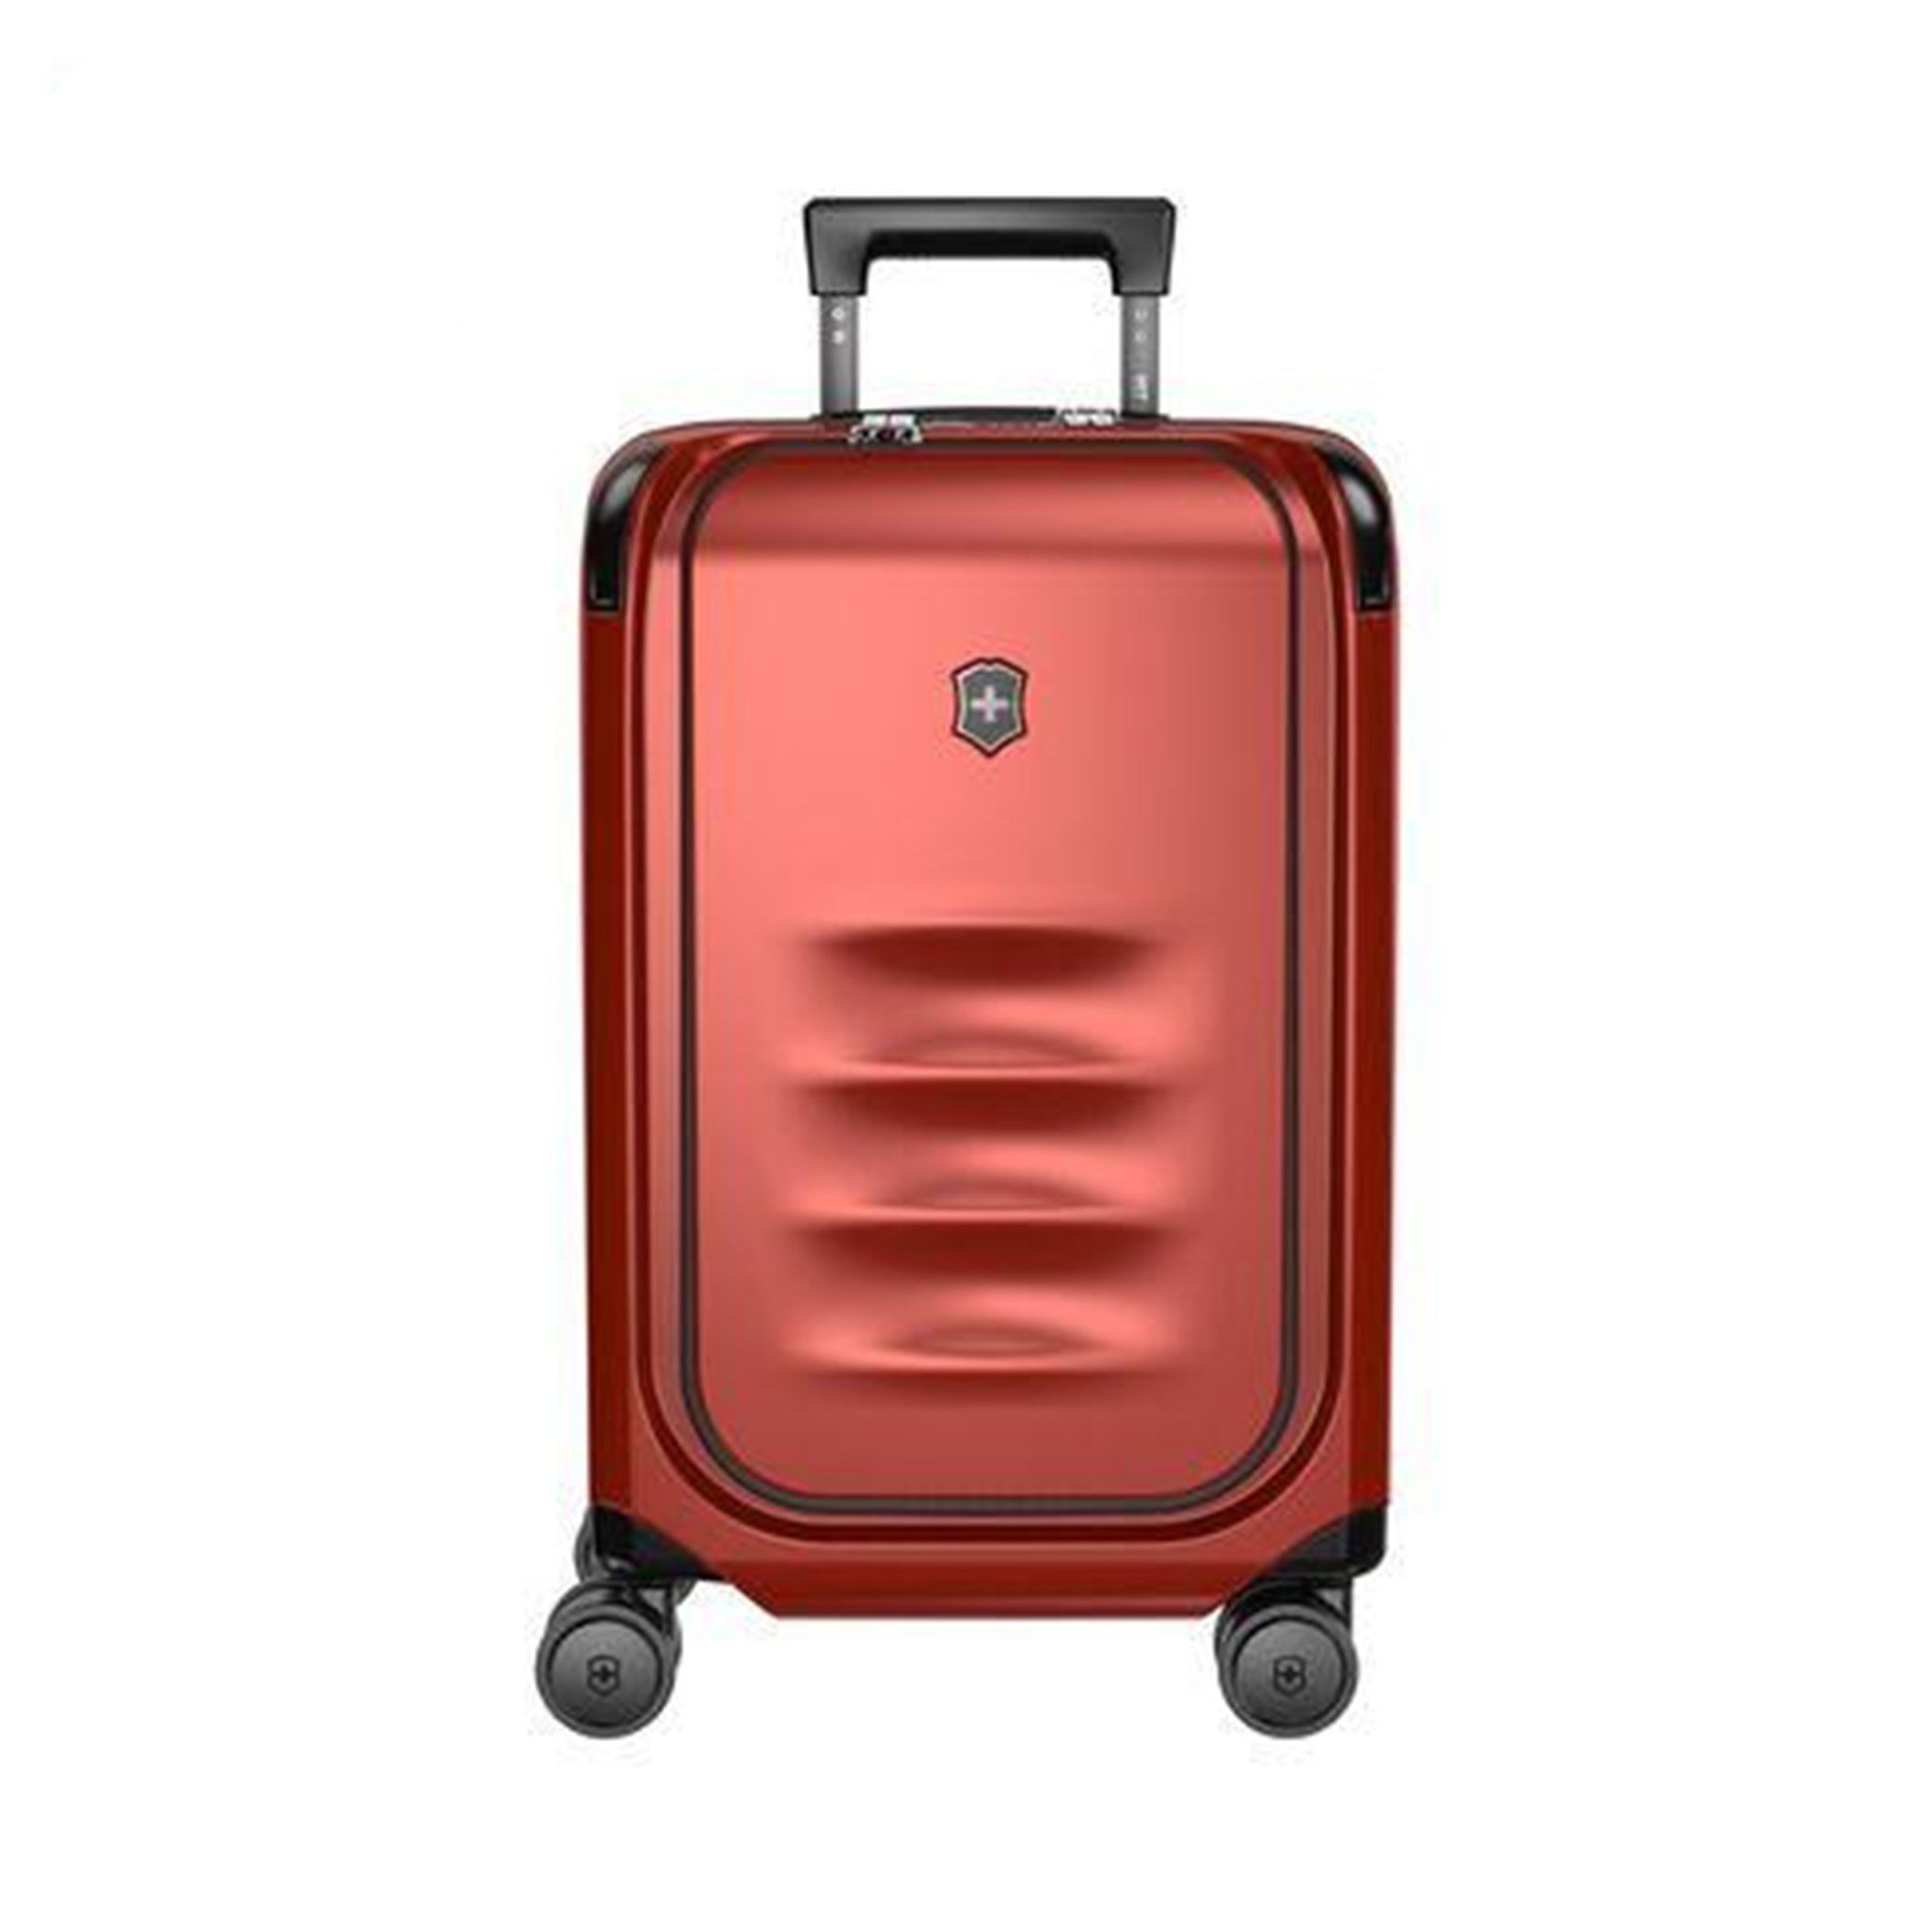 <p><strong>$575.00</strong></p><p>After relying on its Swiss Army Knives and watches for years, we named Victorinox our best heavy-duty luggage brand because we trust its materials and workmanship.</p><p> The <strong>Spectra 3.0 Frequent Flyer Carry-On</strong> is tough. Made from a patented, high-performance, recycled polycarbonate with versatile easy-access pockets and a removable divider, it makes travel a breeze. The expansion system offers up to 20% additional capacity, and a front-opening compartment handily stores your business essentials. It's even customizable with engraved initials or a personal message. </p>